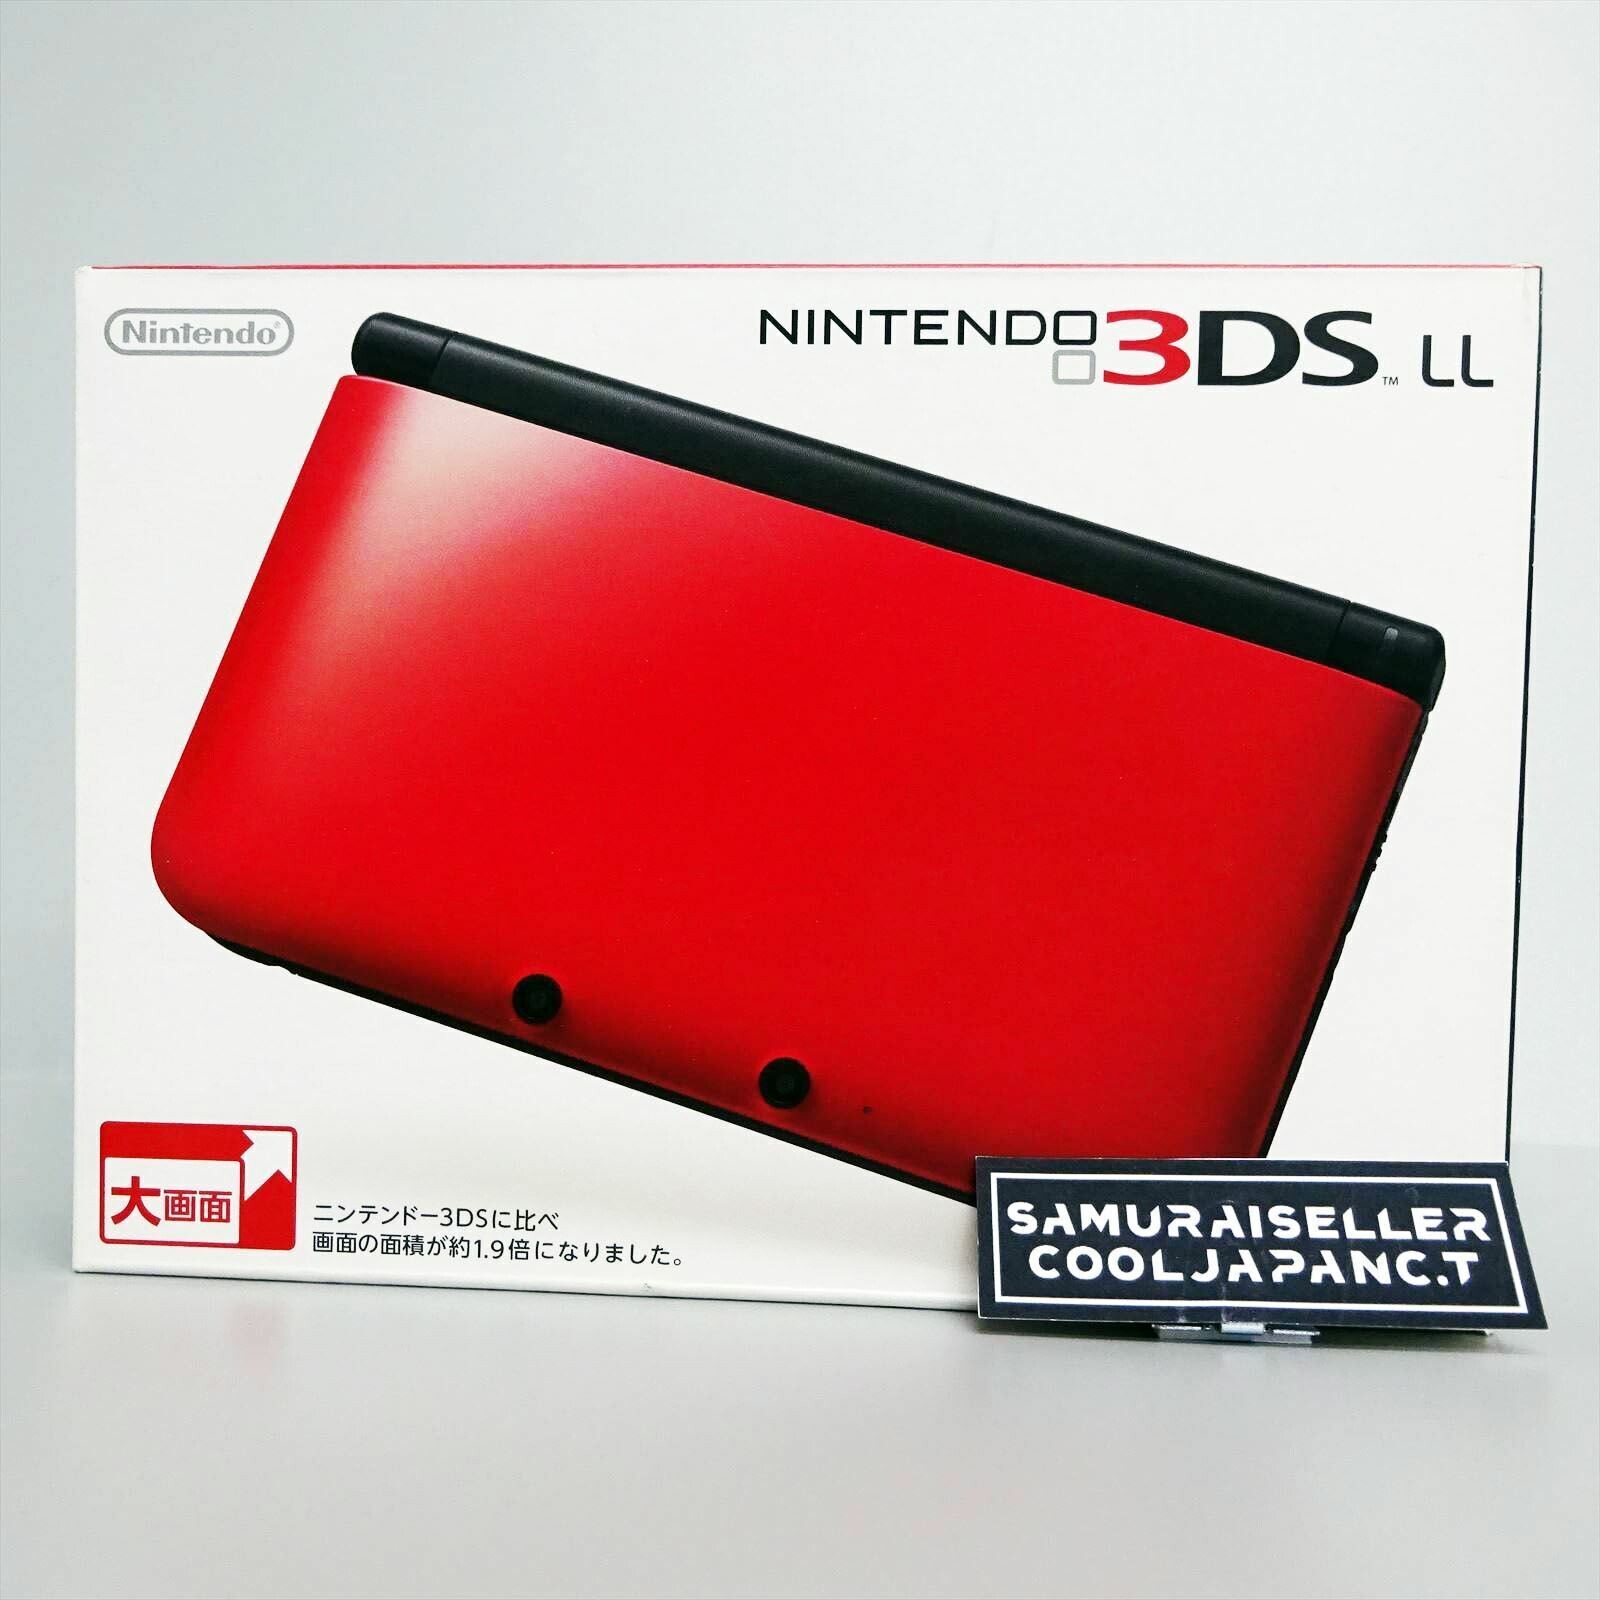  Nintendo 3DS LL Red/Black Console [JP]